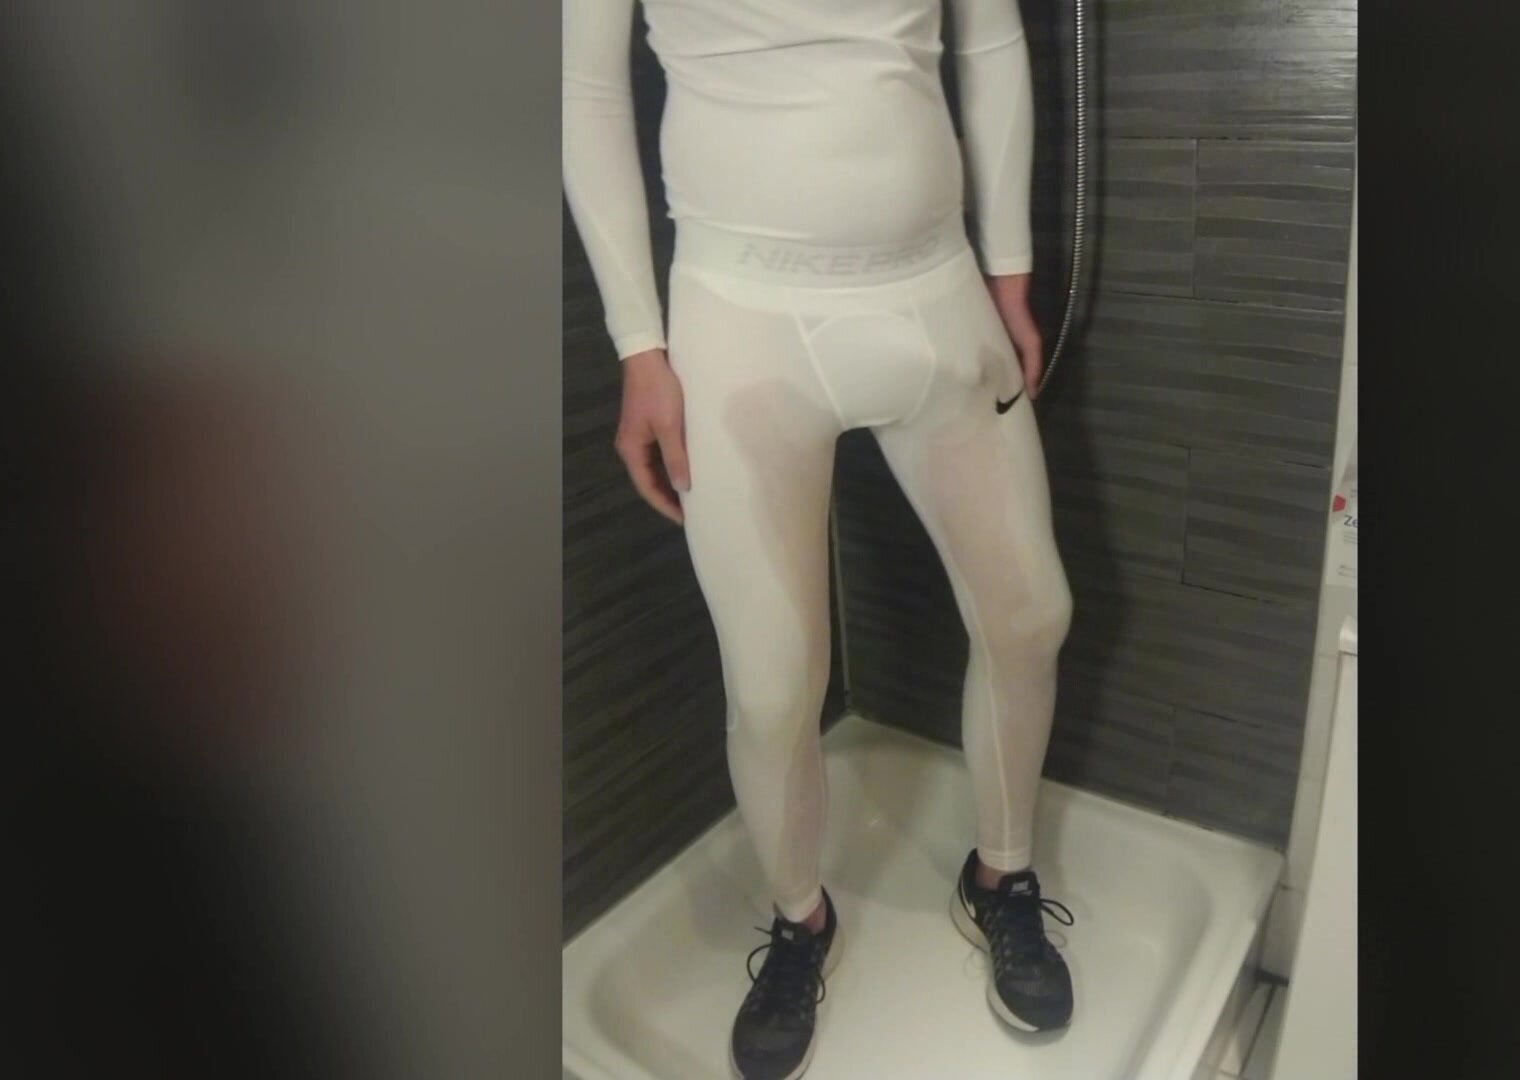 Some lycra piss and cum